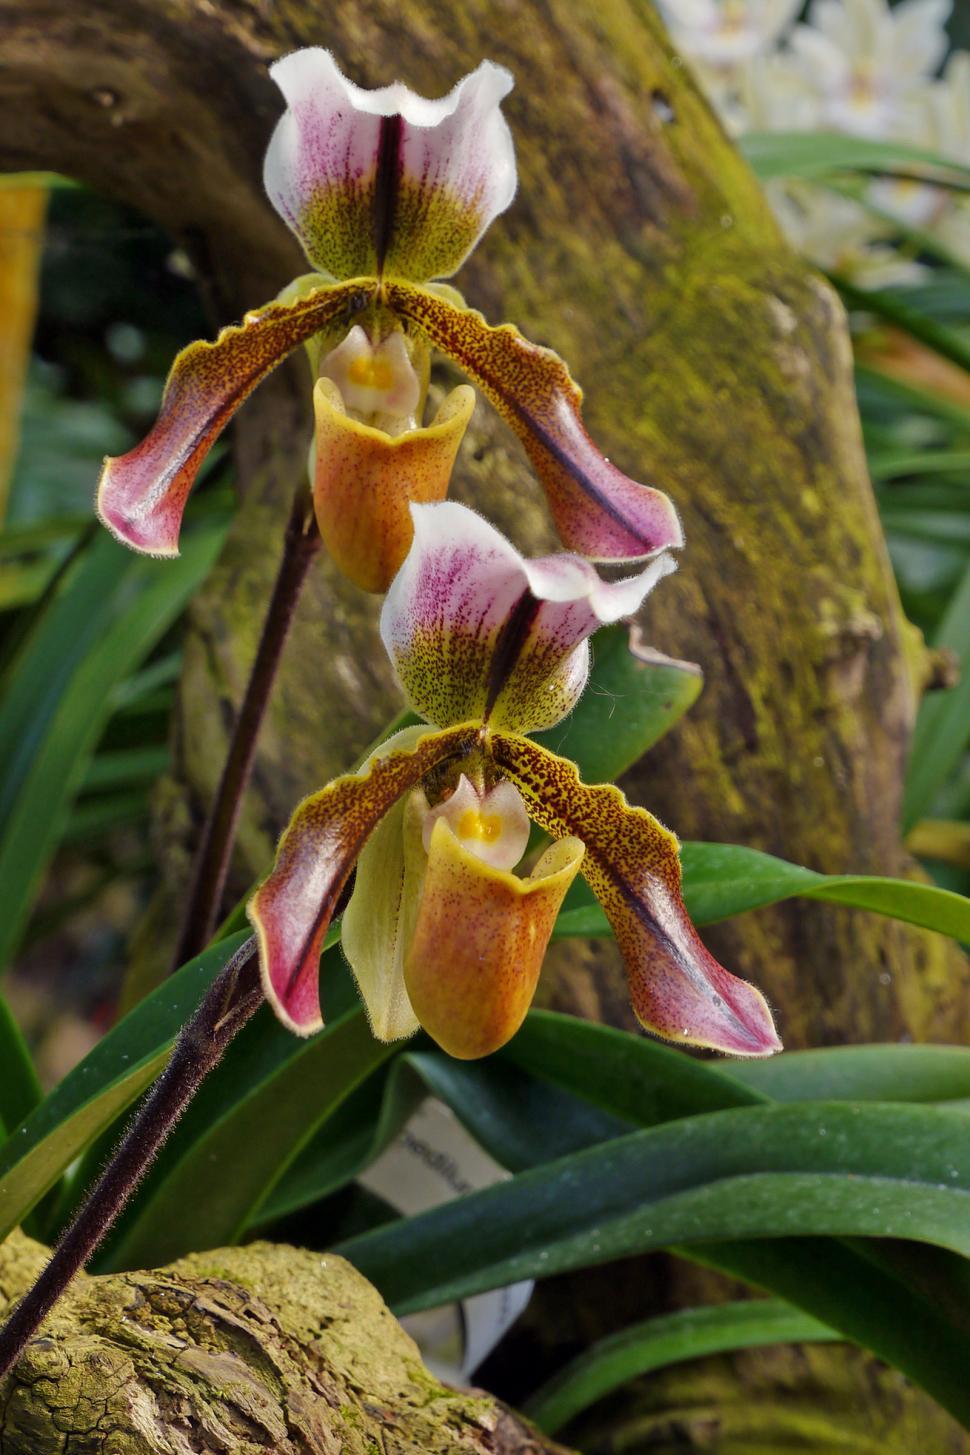 Free Image of Lady Slipper Orchid Blooms 